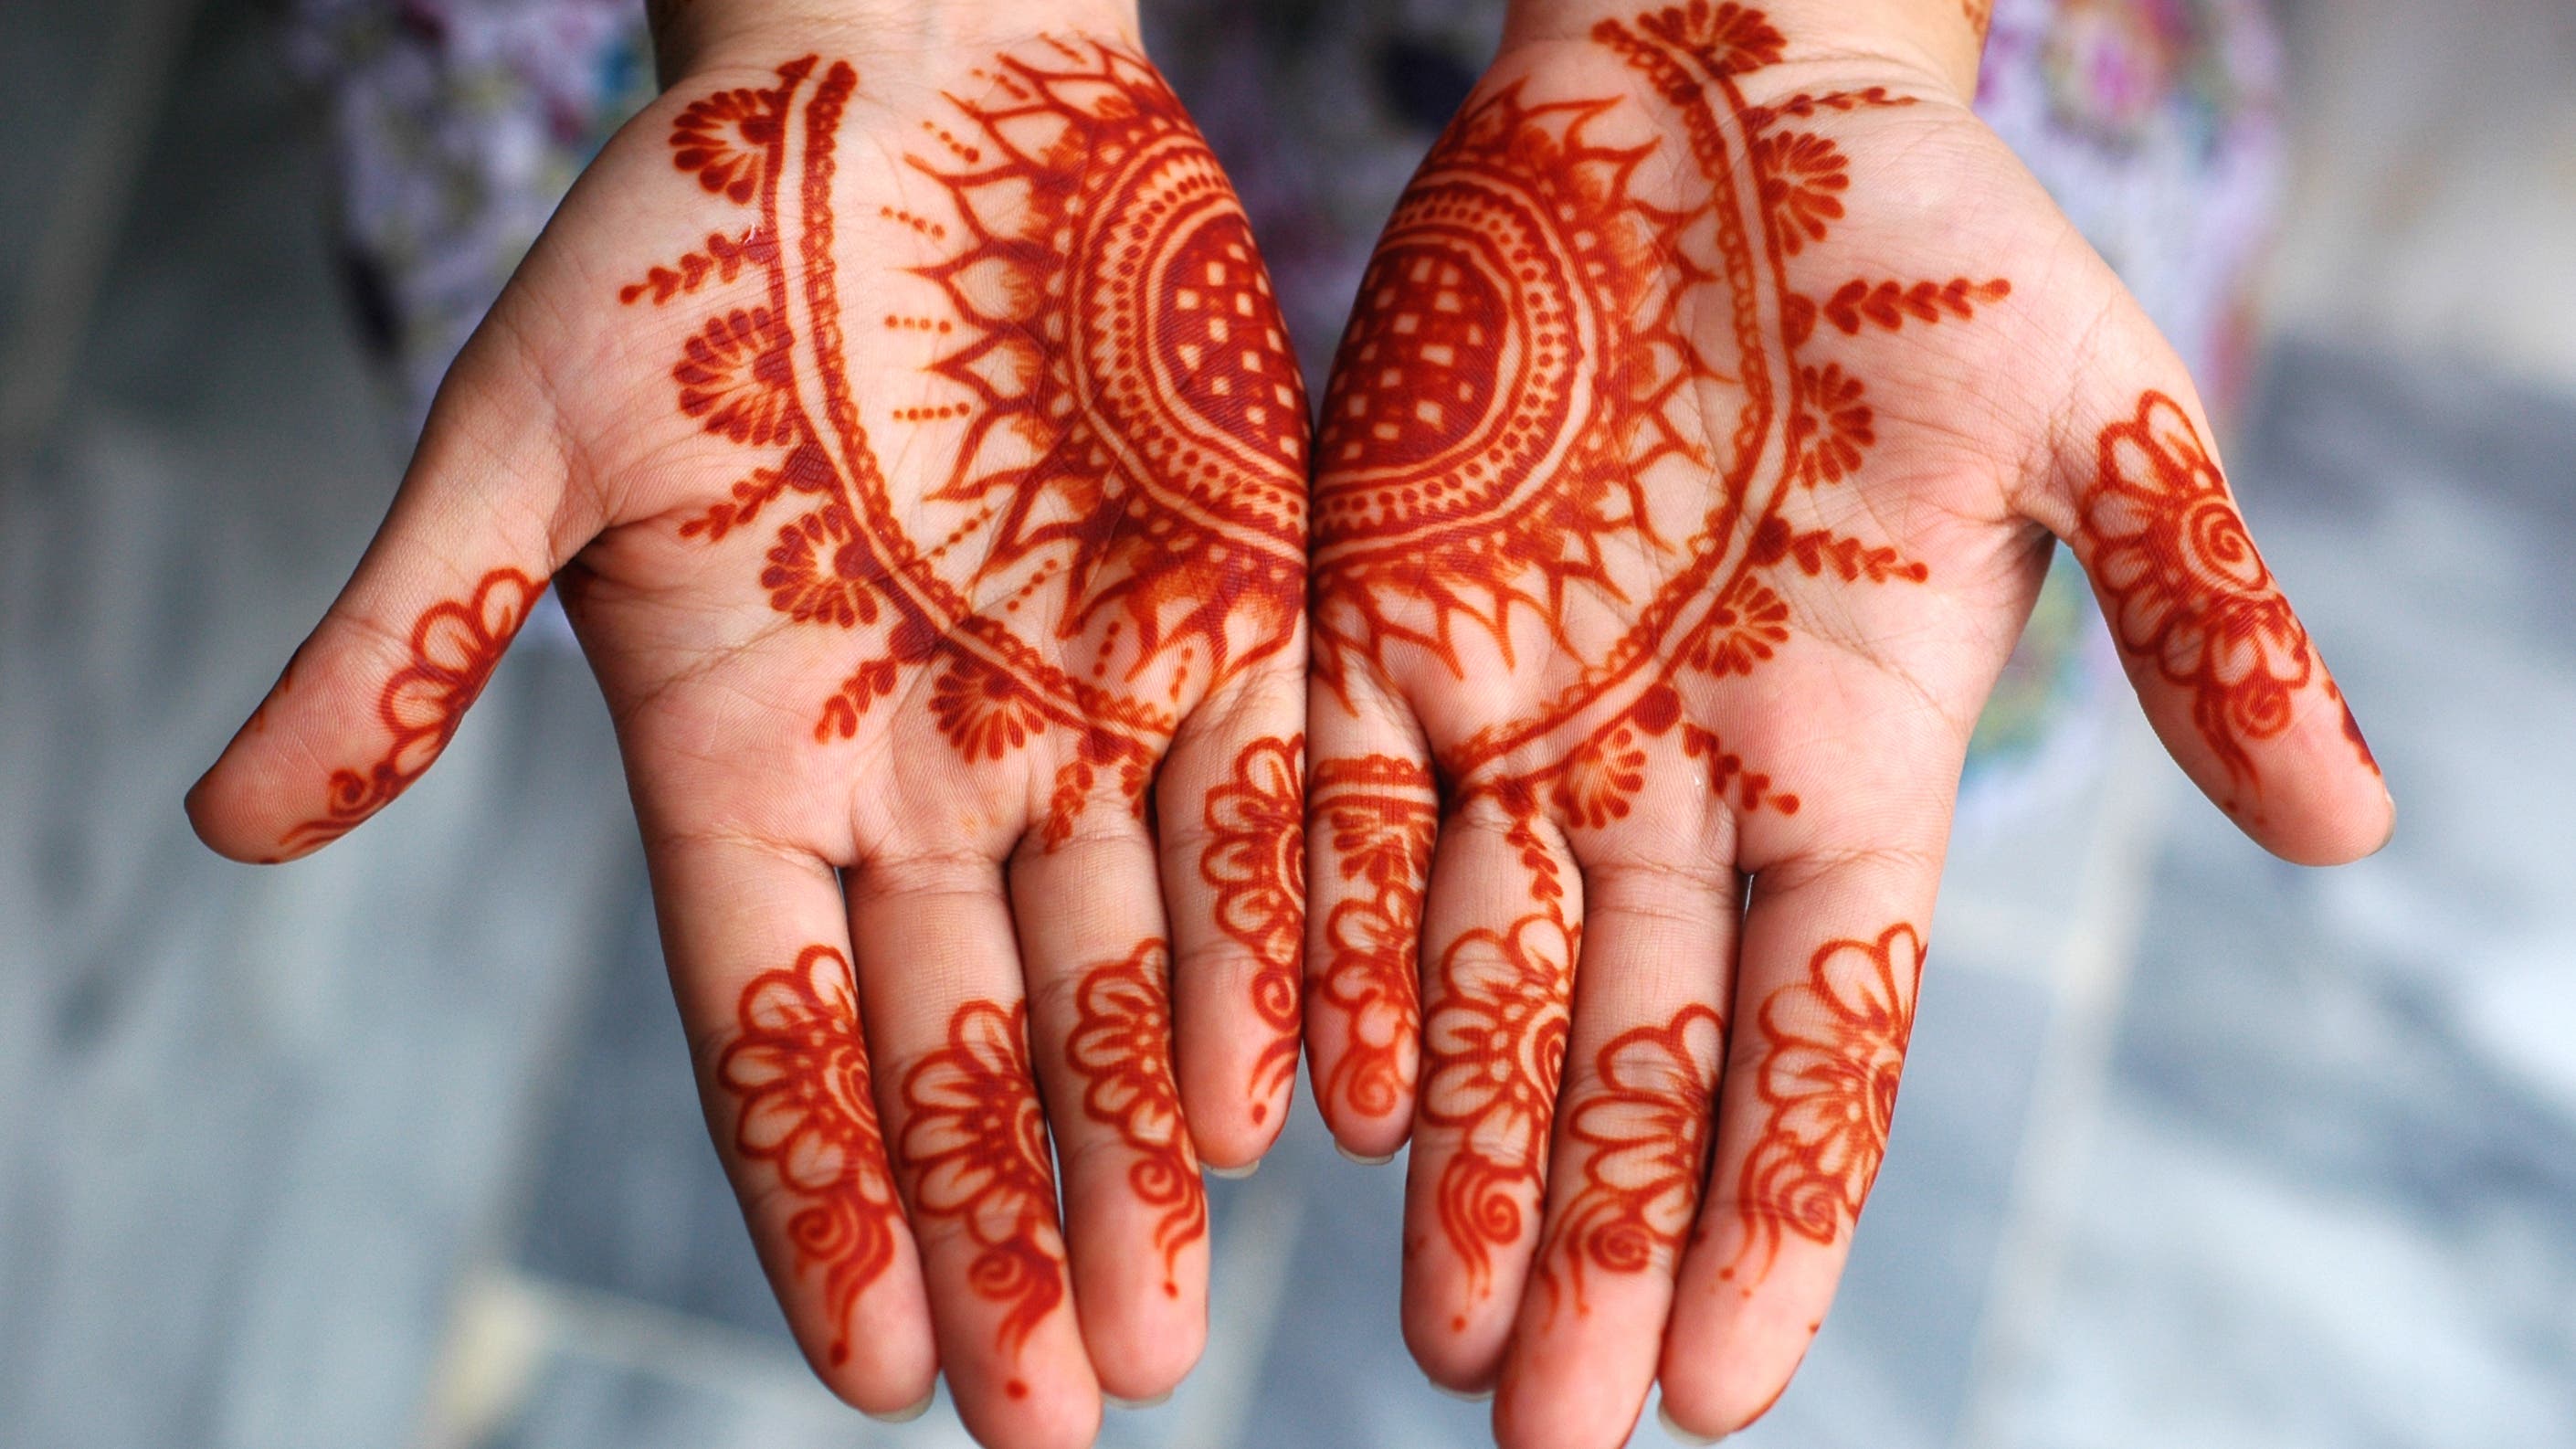 A woman displaying her mehndi (henna) on occasion of Eid-al-Fitr, celebrated at the end of the holy month of Ramadan.